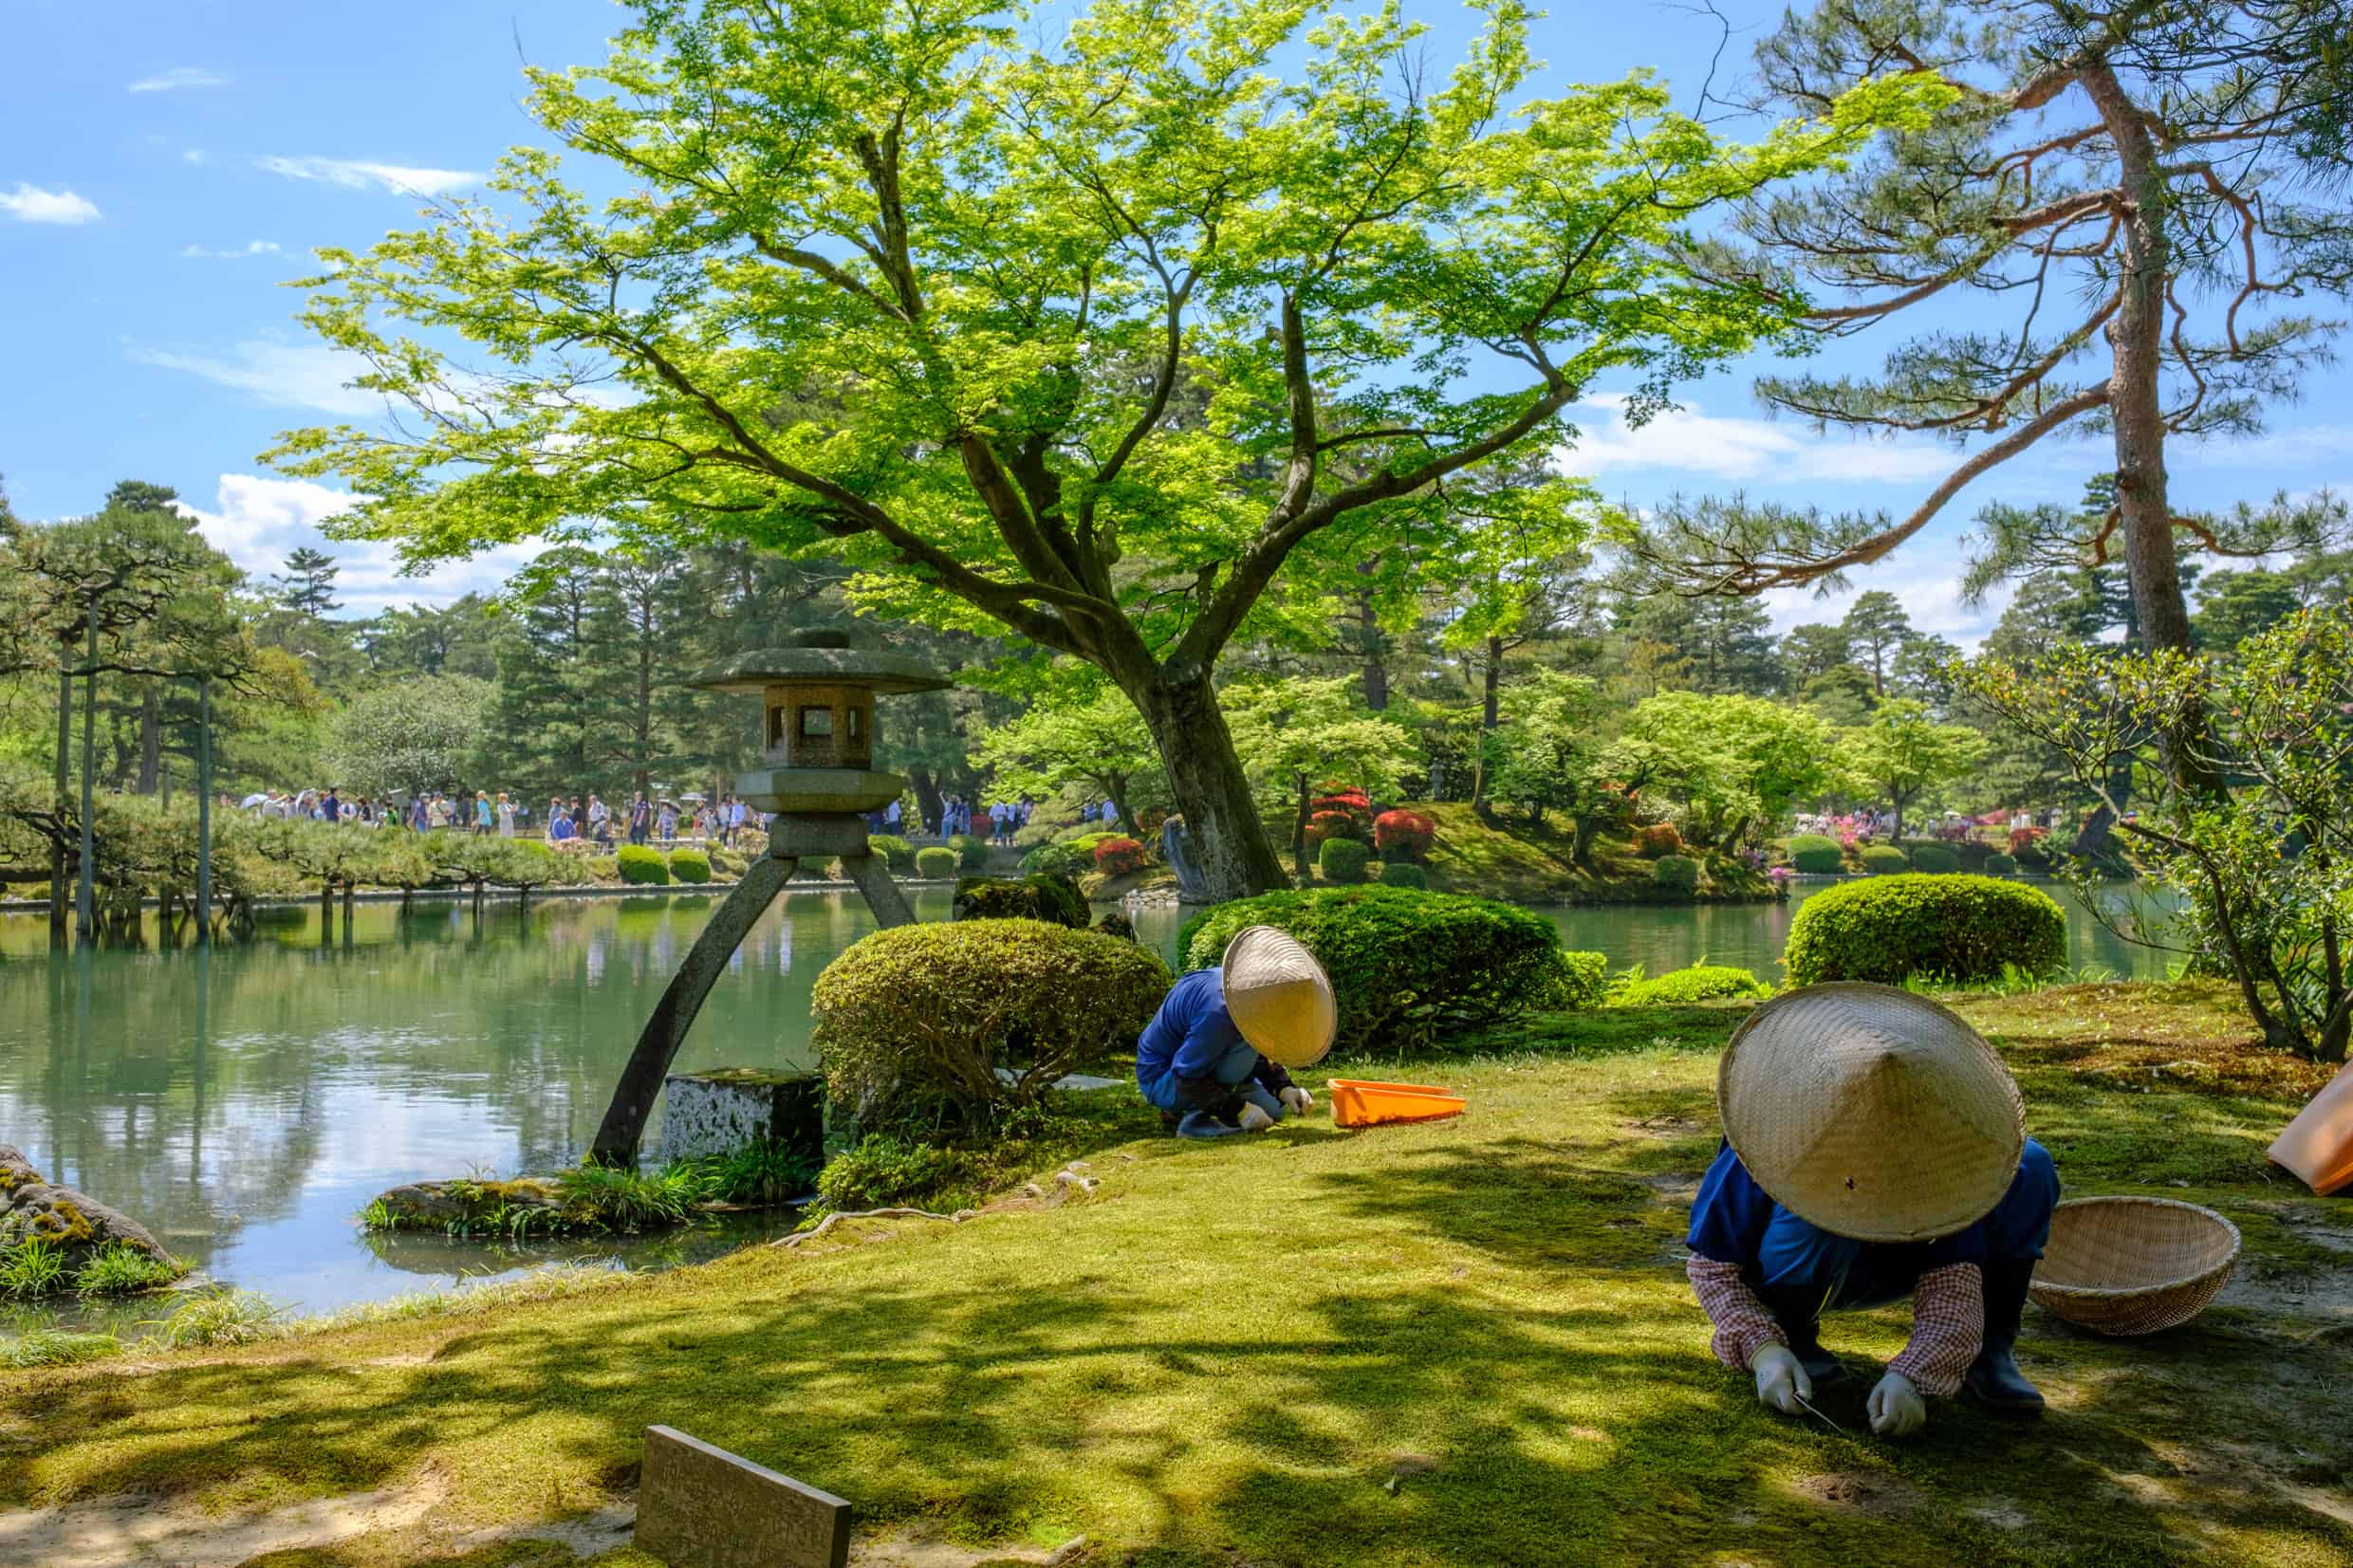 Instagrammable Kanazawa: Check Out These 4 Swoon-Worthy Spots